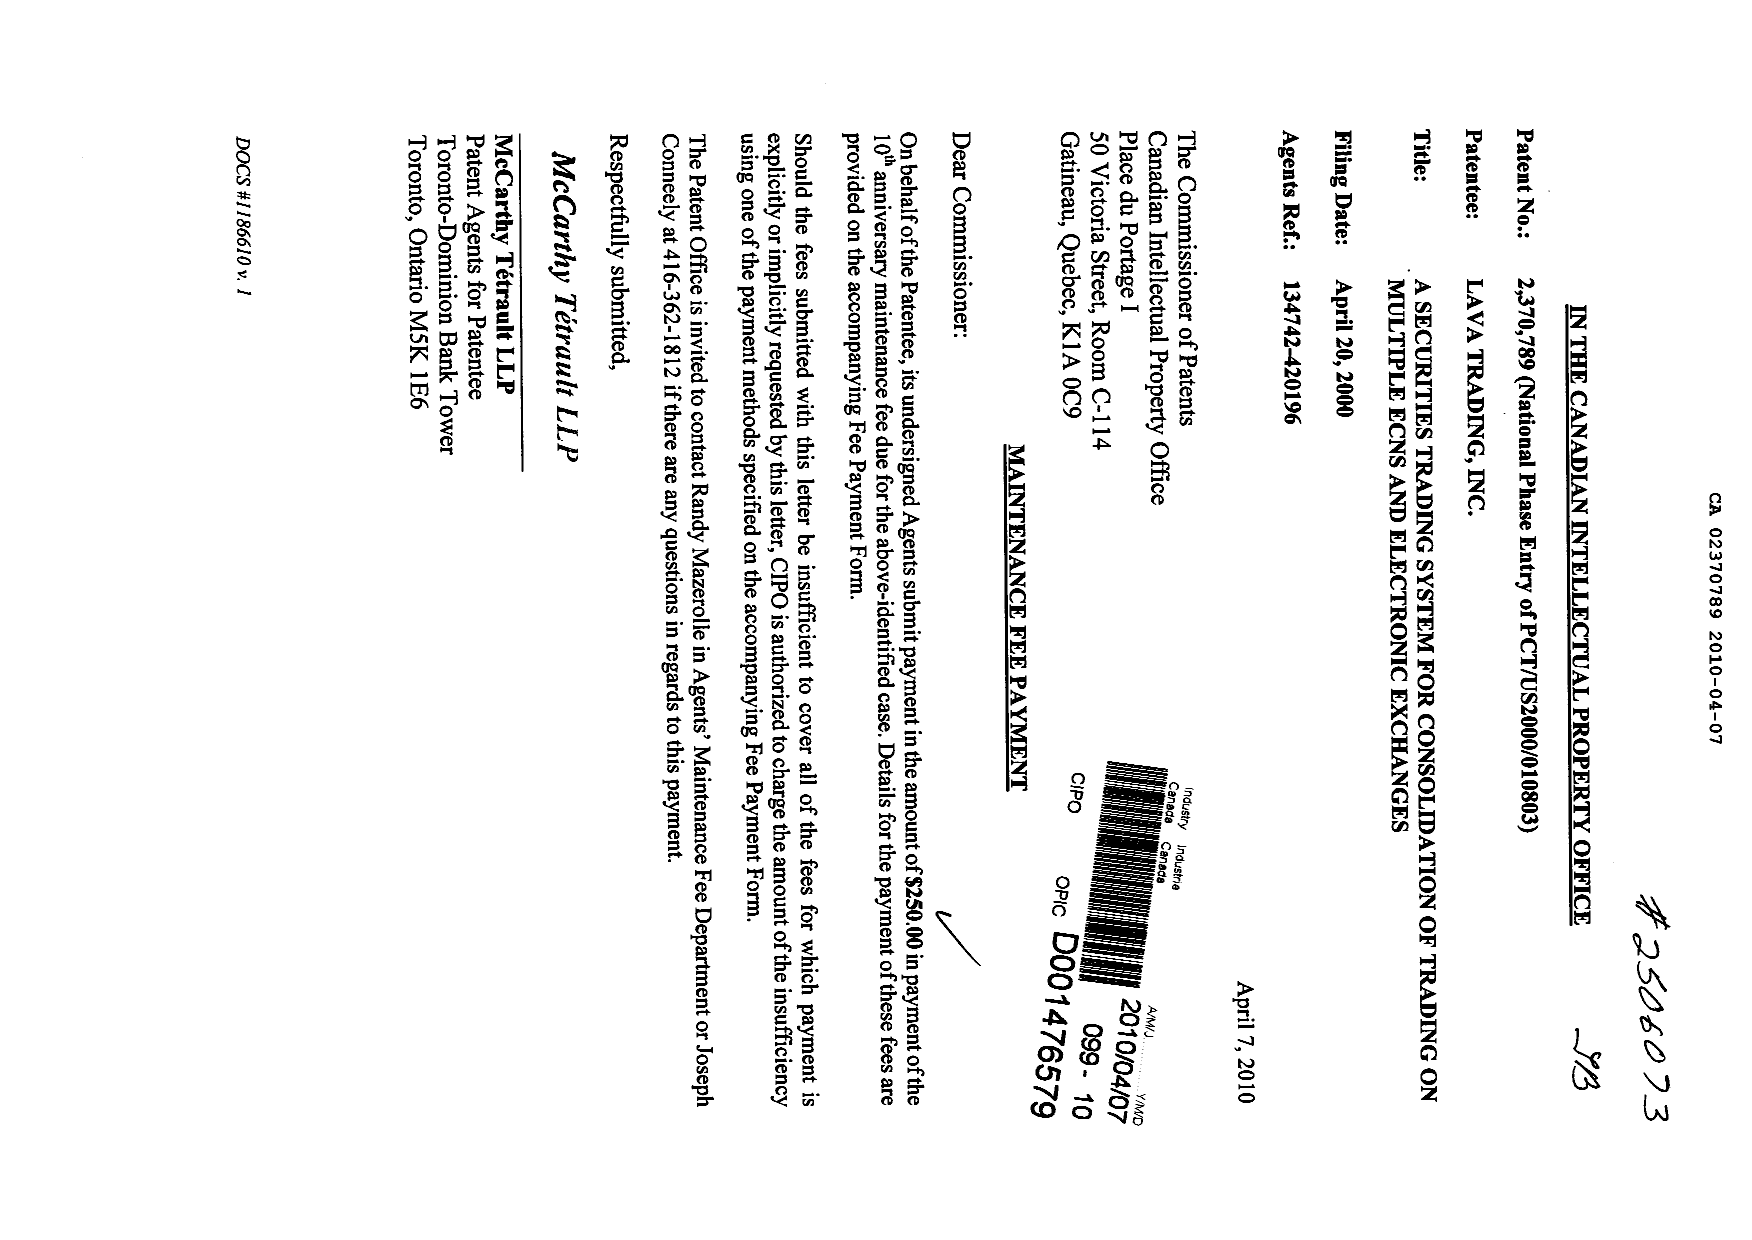 Canadian Patent Document 2370789. Fees 20100407. Image 1 of 1